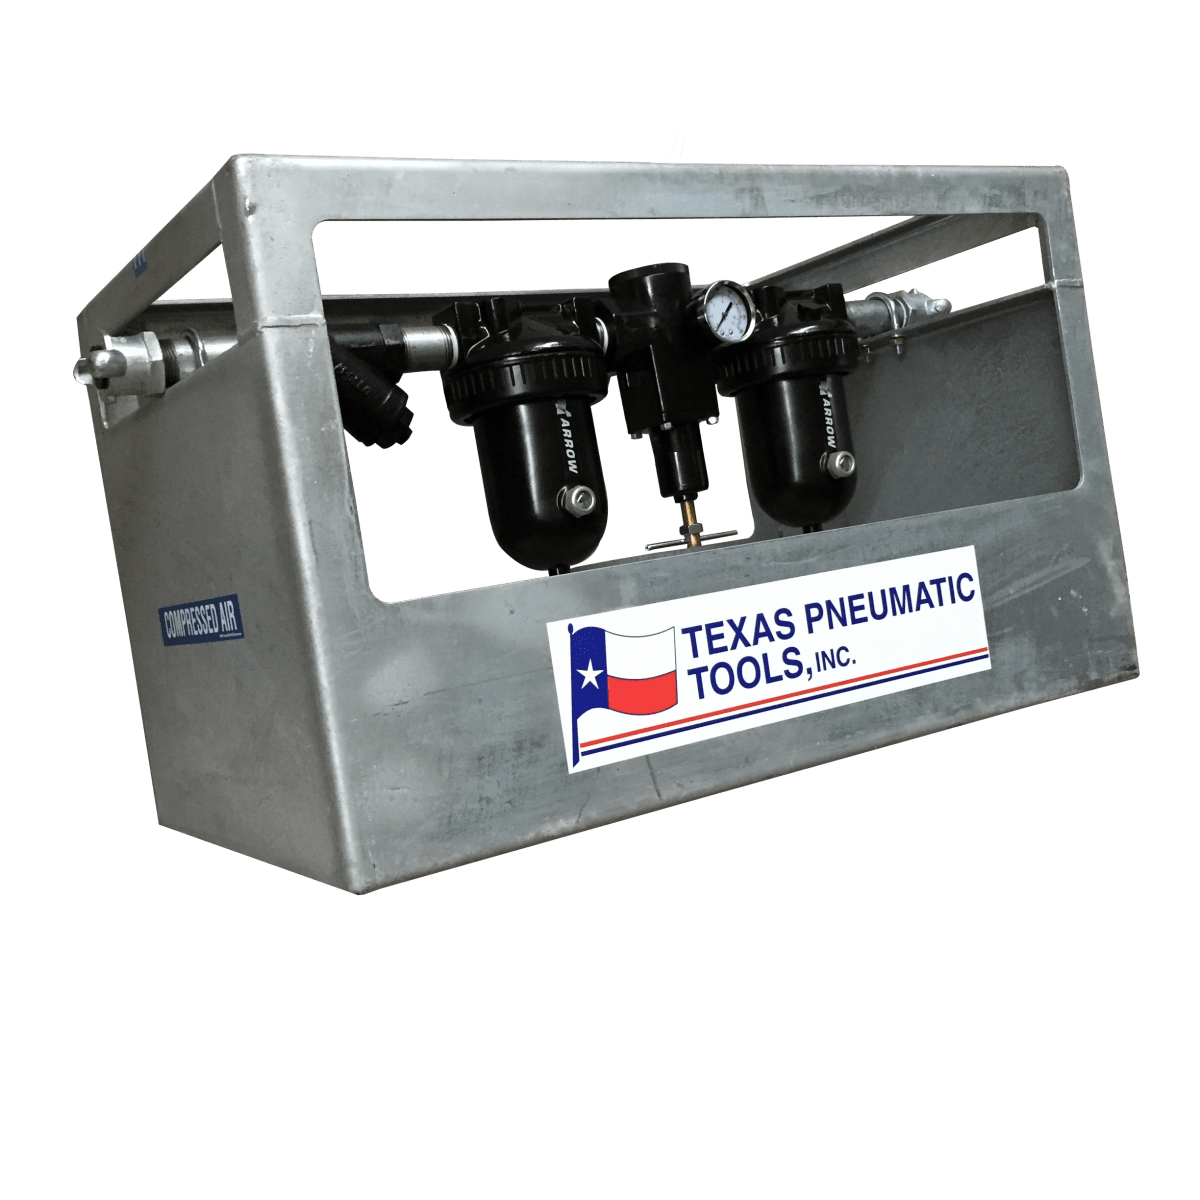 TX-3/4 FRDD - 3/4" Air Filtering System for Paint Spraying w/ Galvanized Cage. 50 CFM Maximum Flow. - Texas Pneumatic Tools